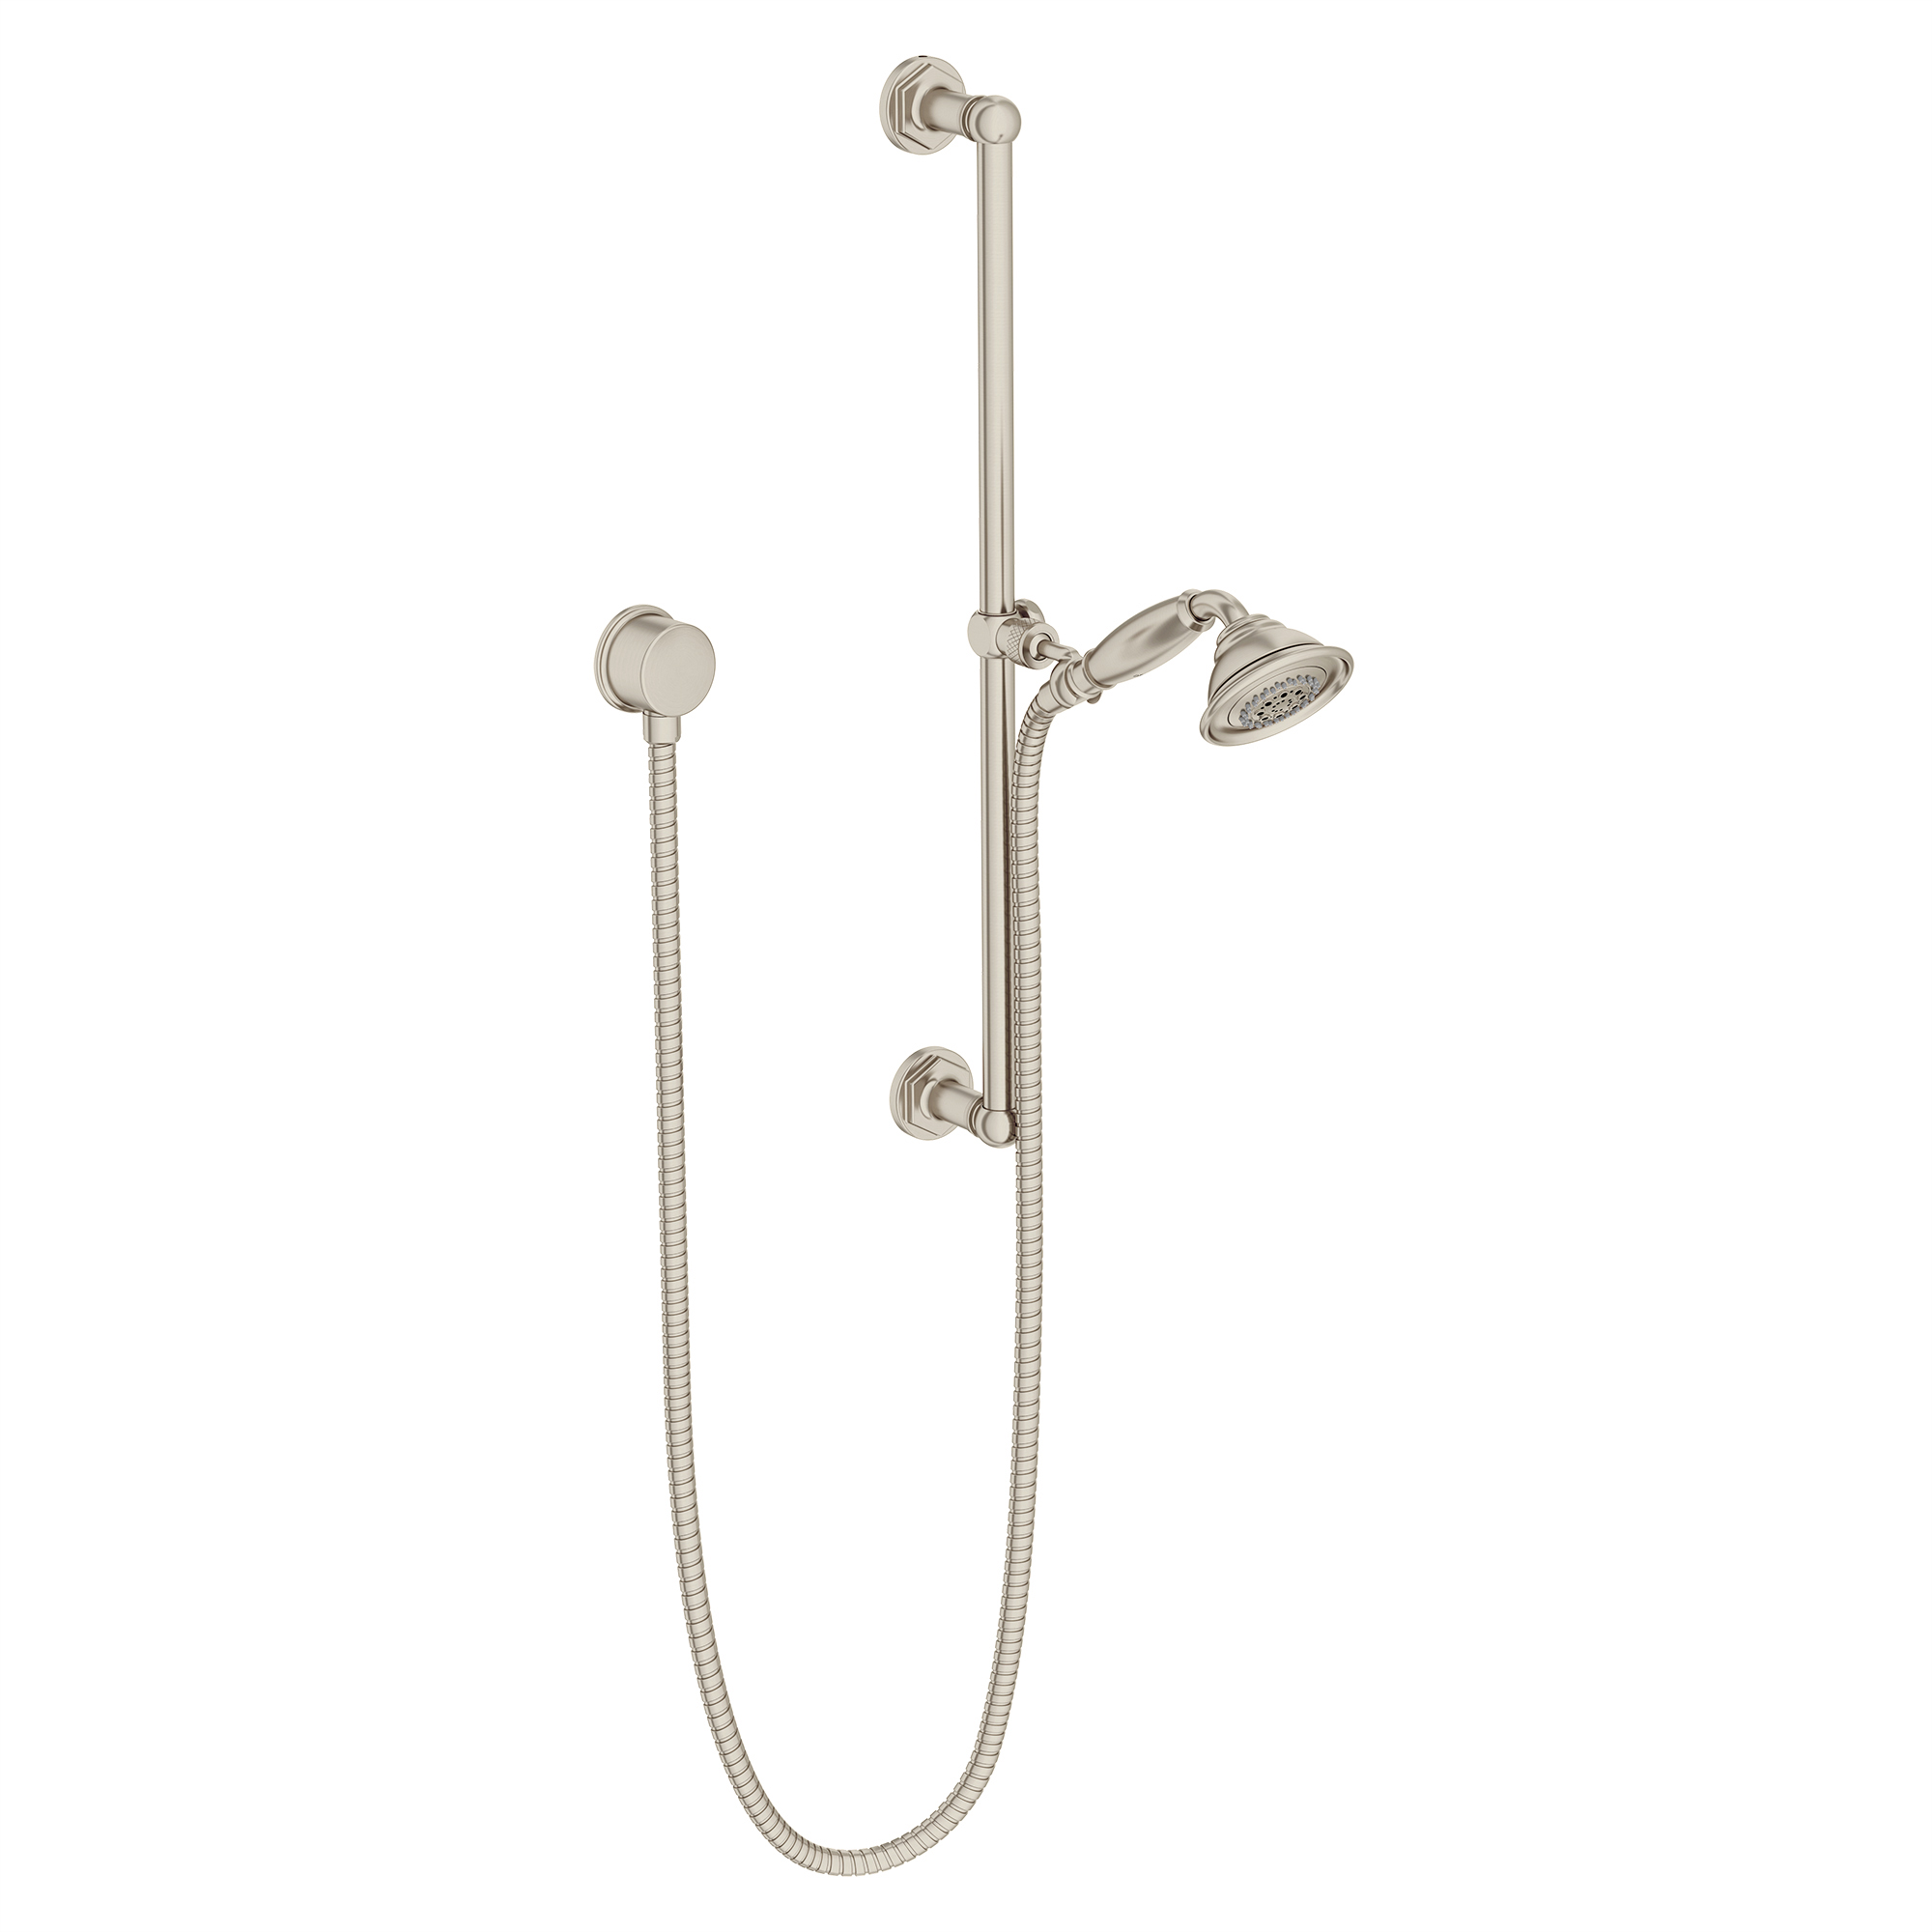 Personal Shower Set with Hand Shower